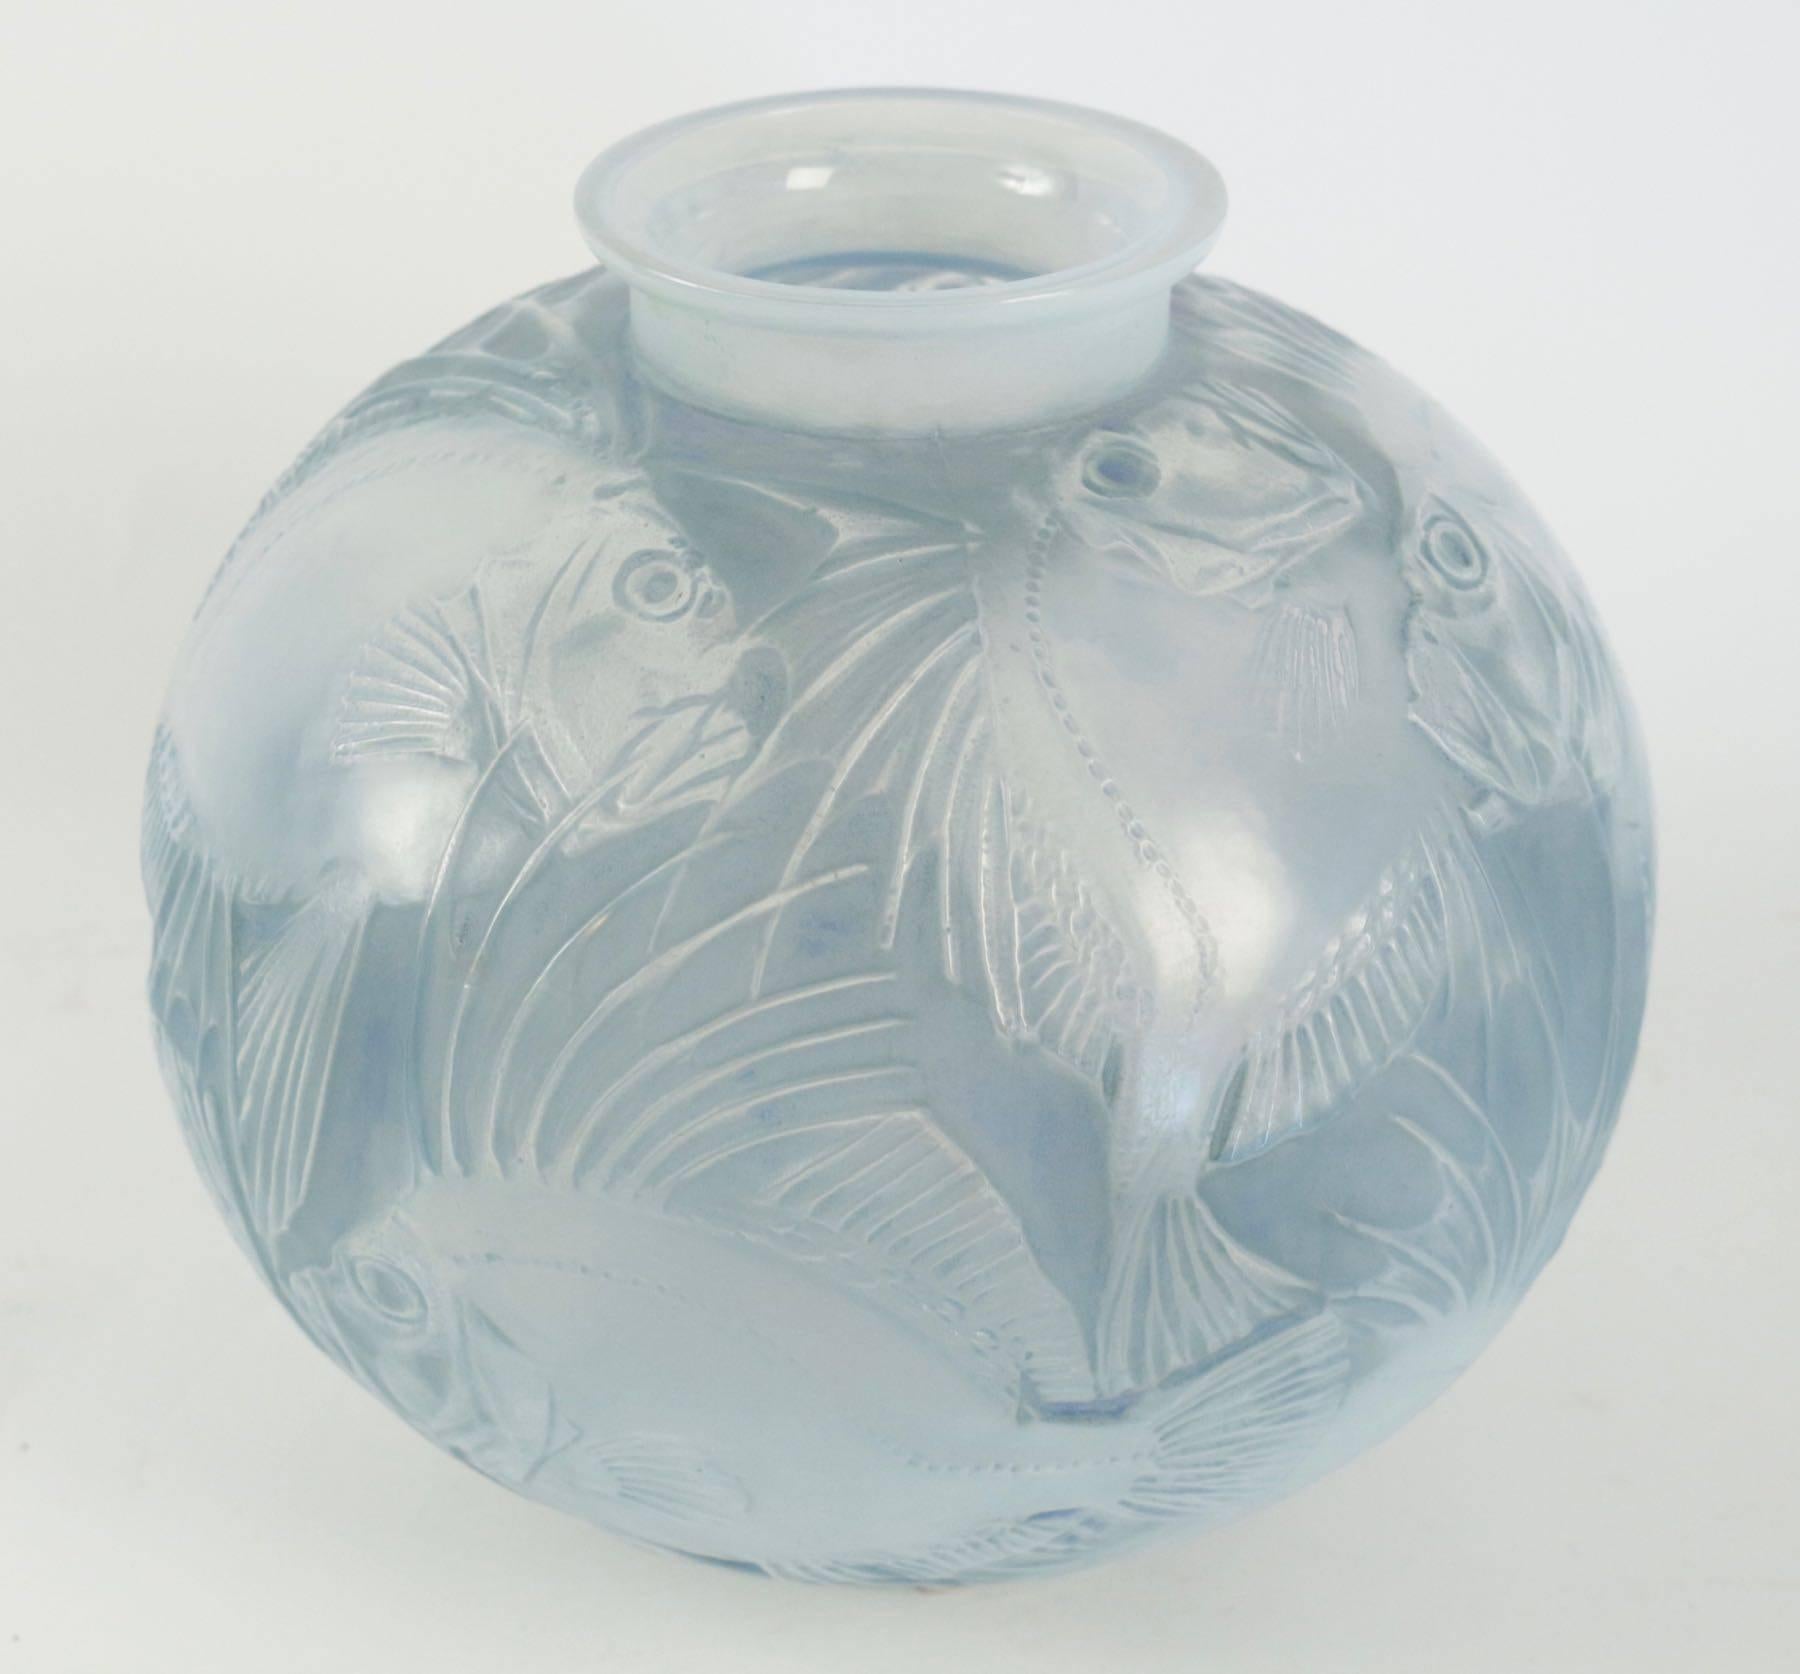 René Lalique (1860-1945) vase Poissons created in 1921.
Stopped in 1937.
Measuring 24.5 cm tall opalescent glass and highlighted with blue stain fish decorated glass R. Lalique Vase with both a relief molded signature on the side of the